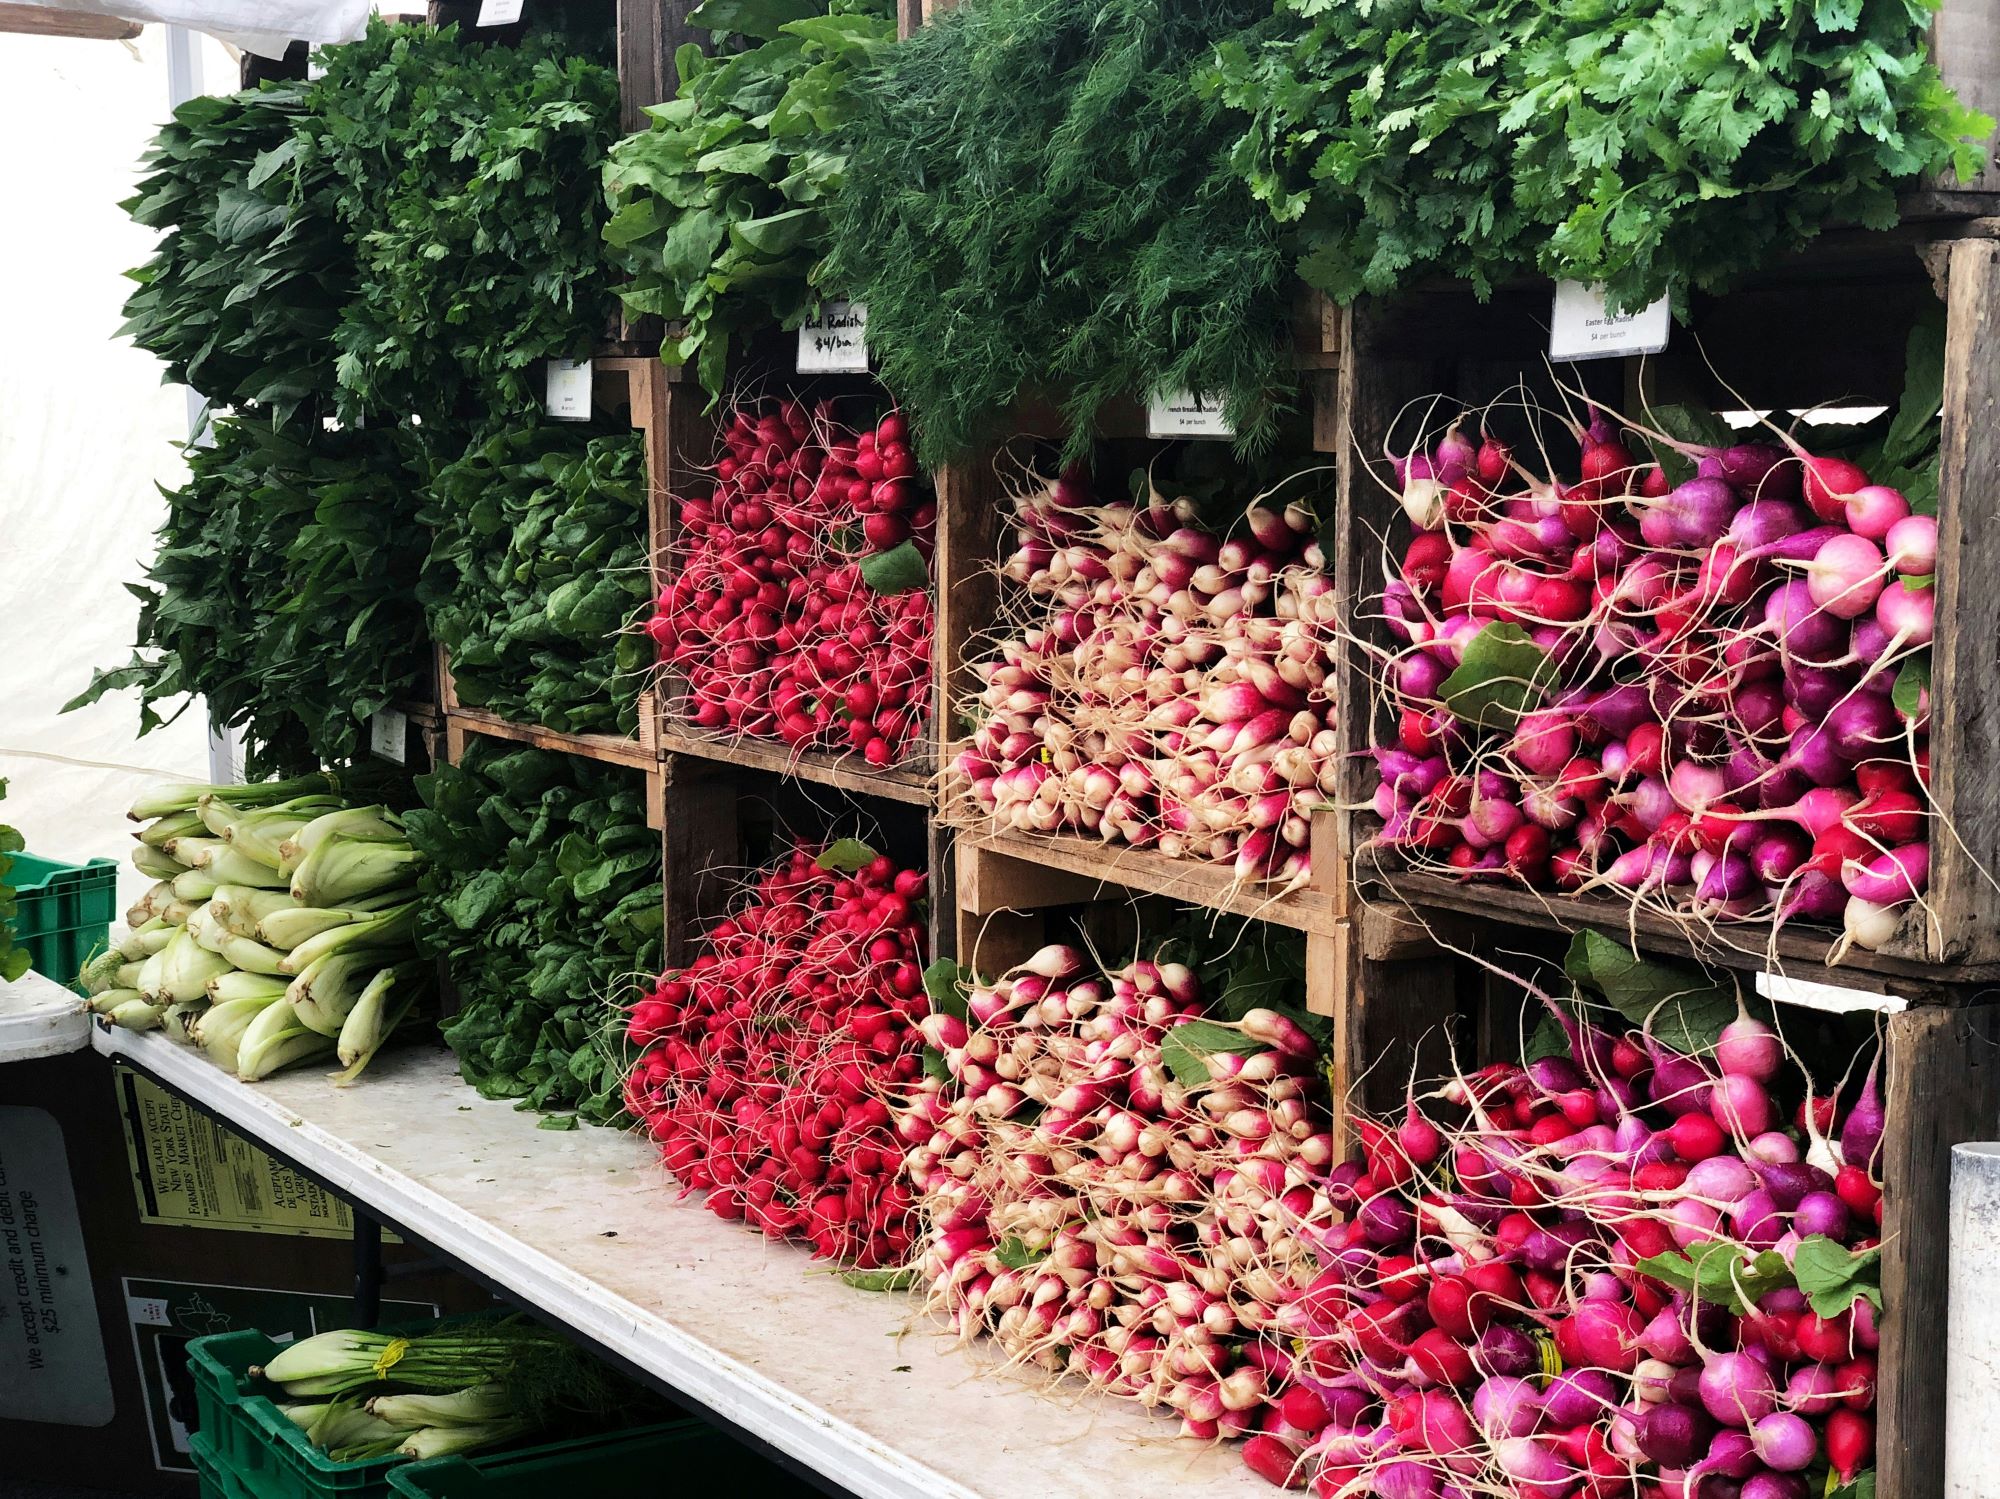 Tips For Shopping At The Farmers’ Market